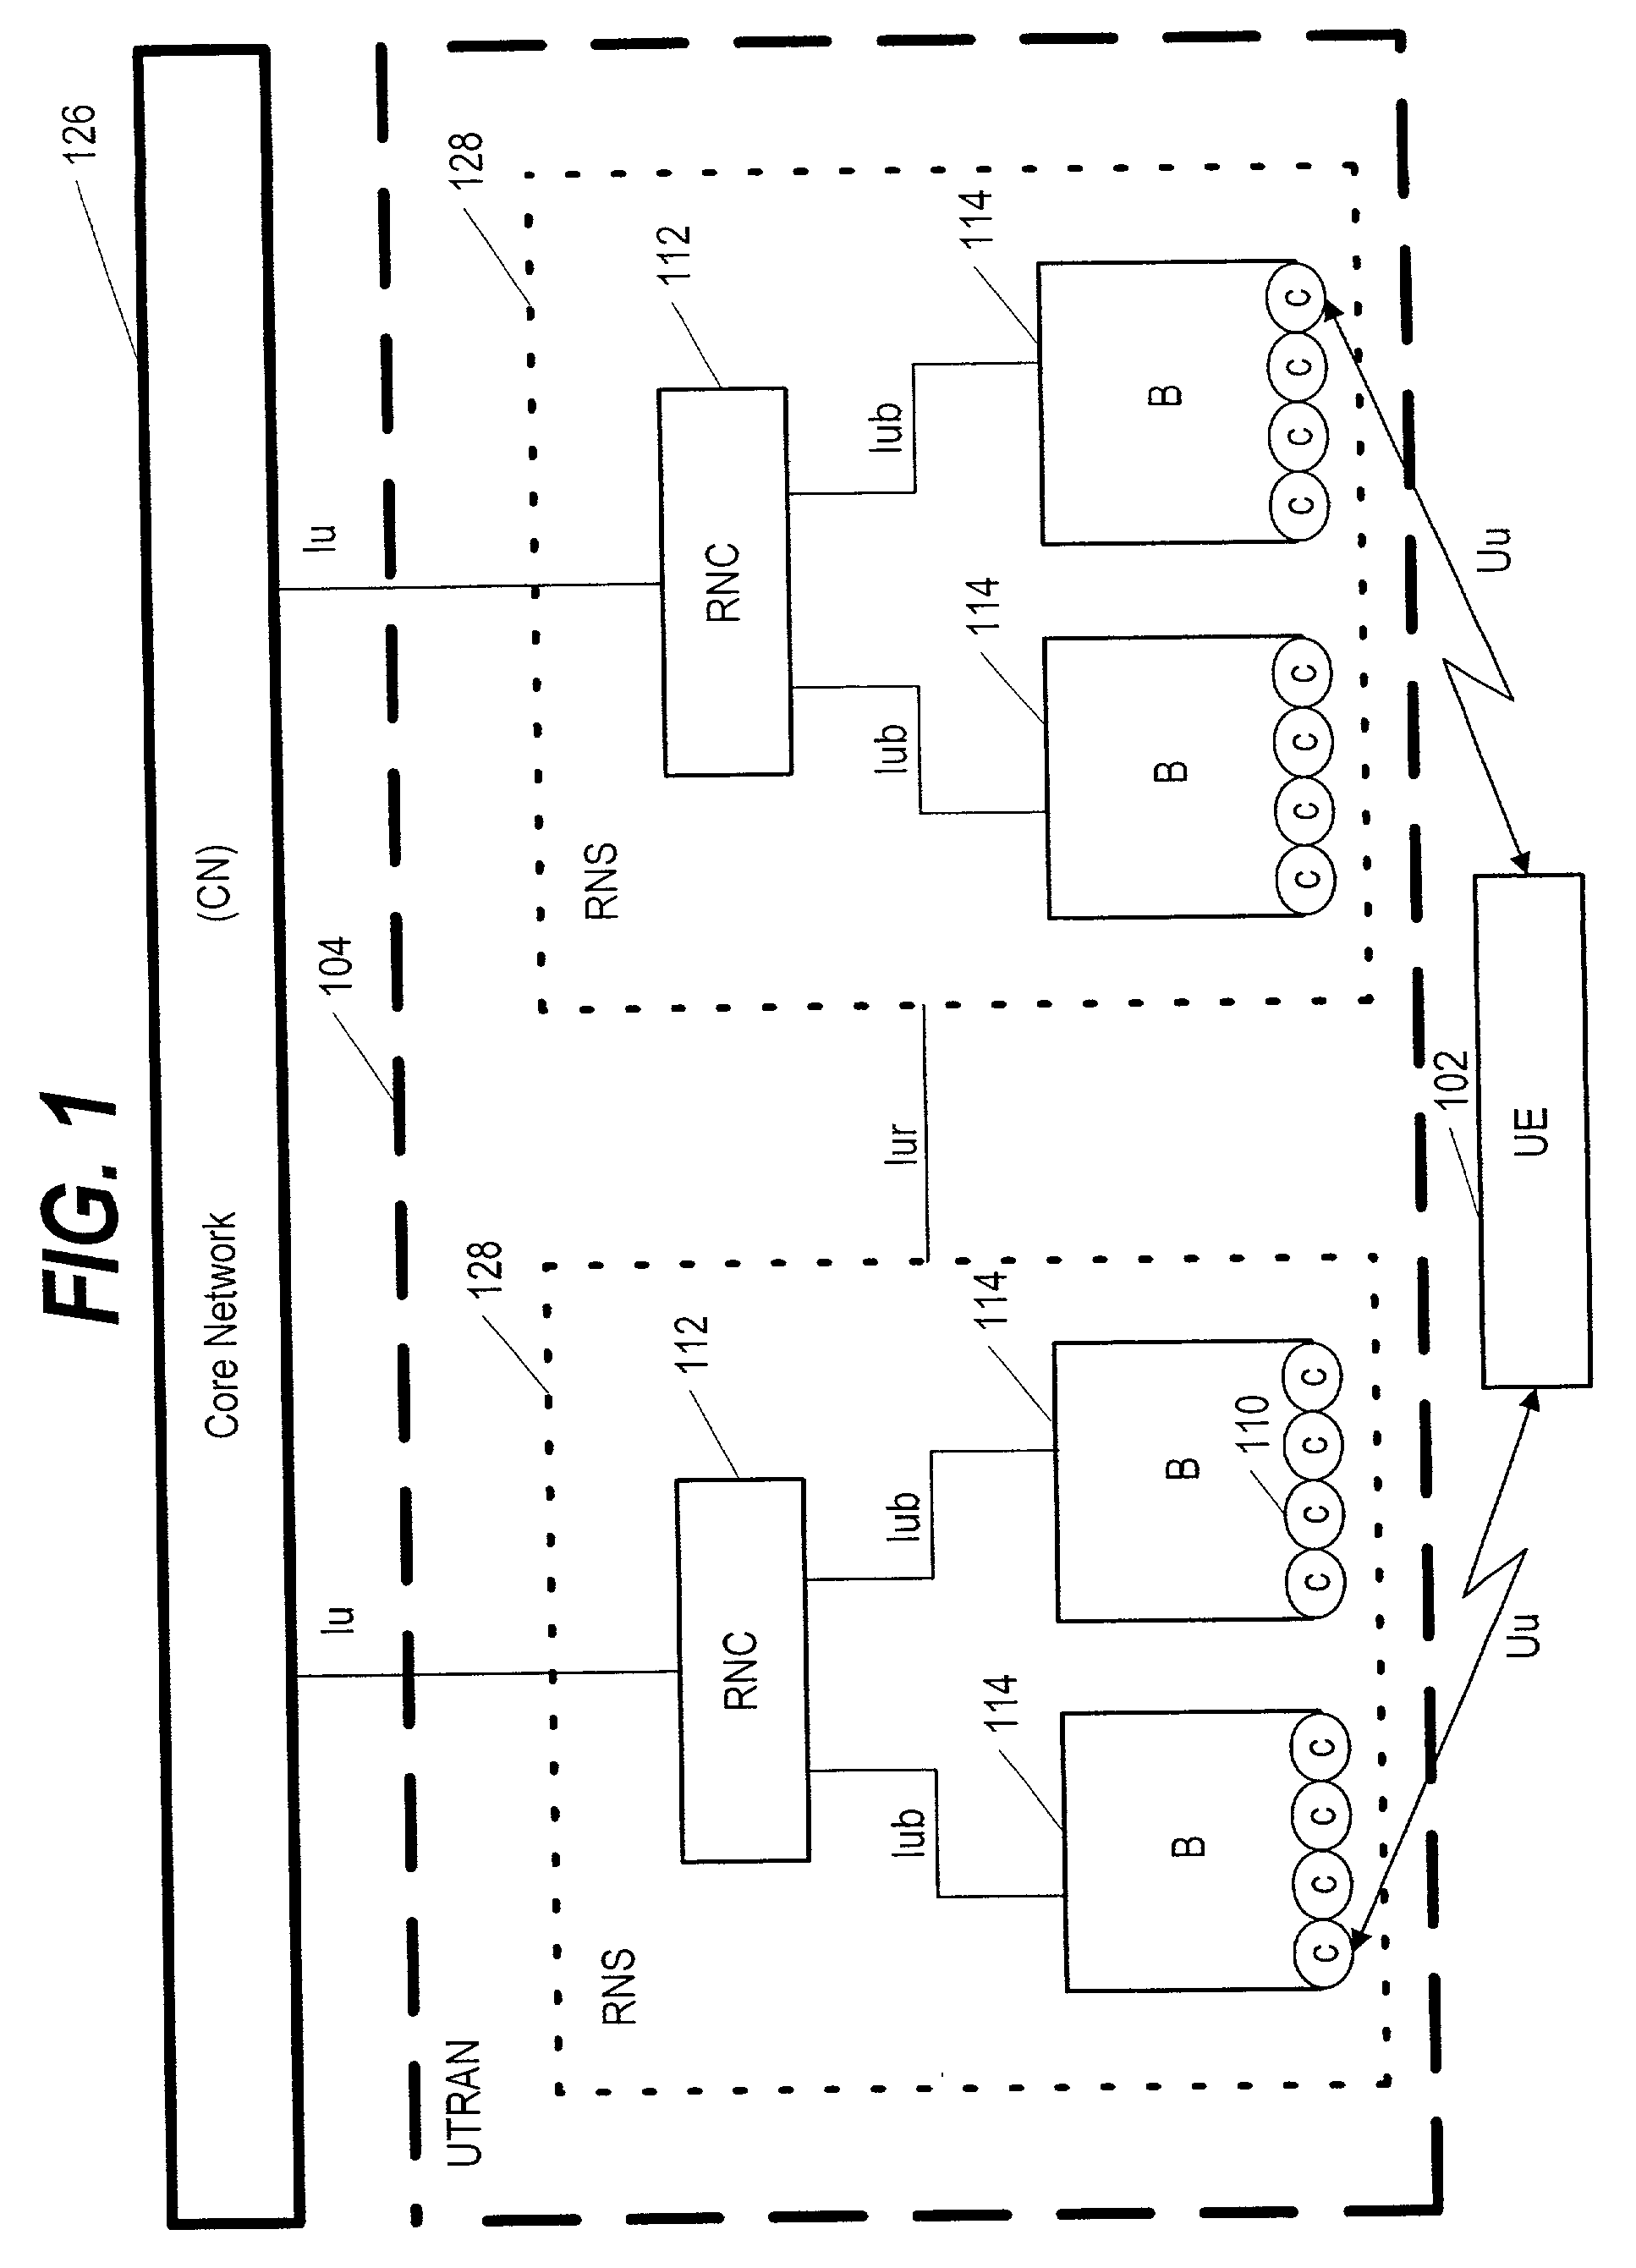 Measurement method and device for activating interfrequency handover in a wireless telecommunication network